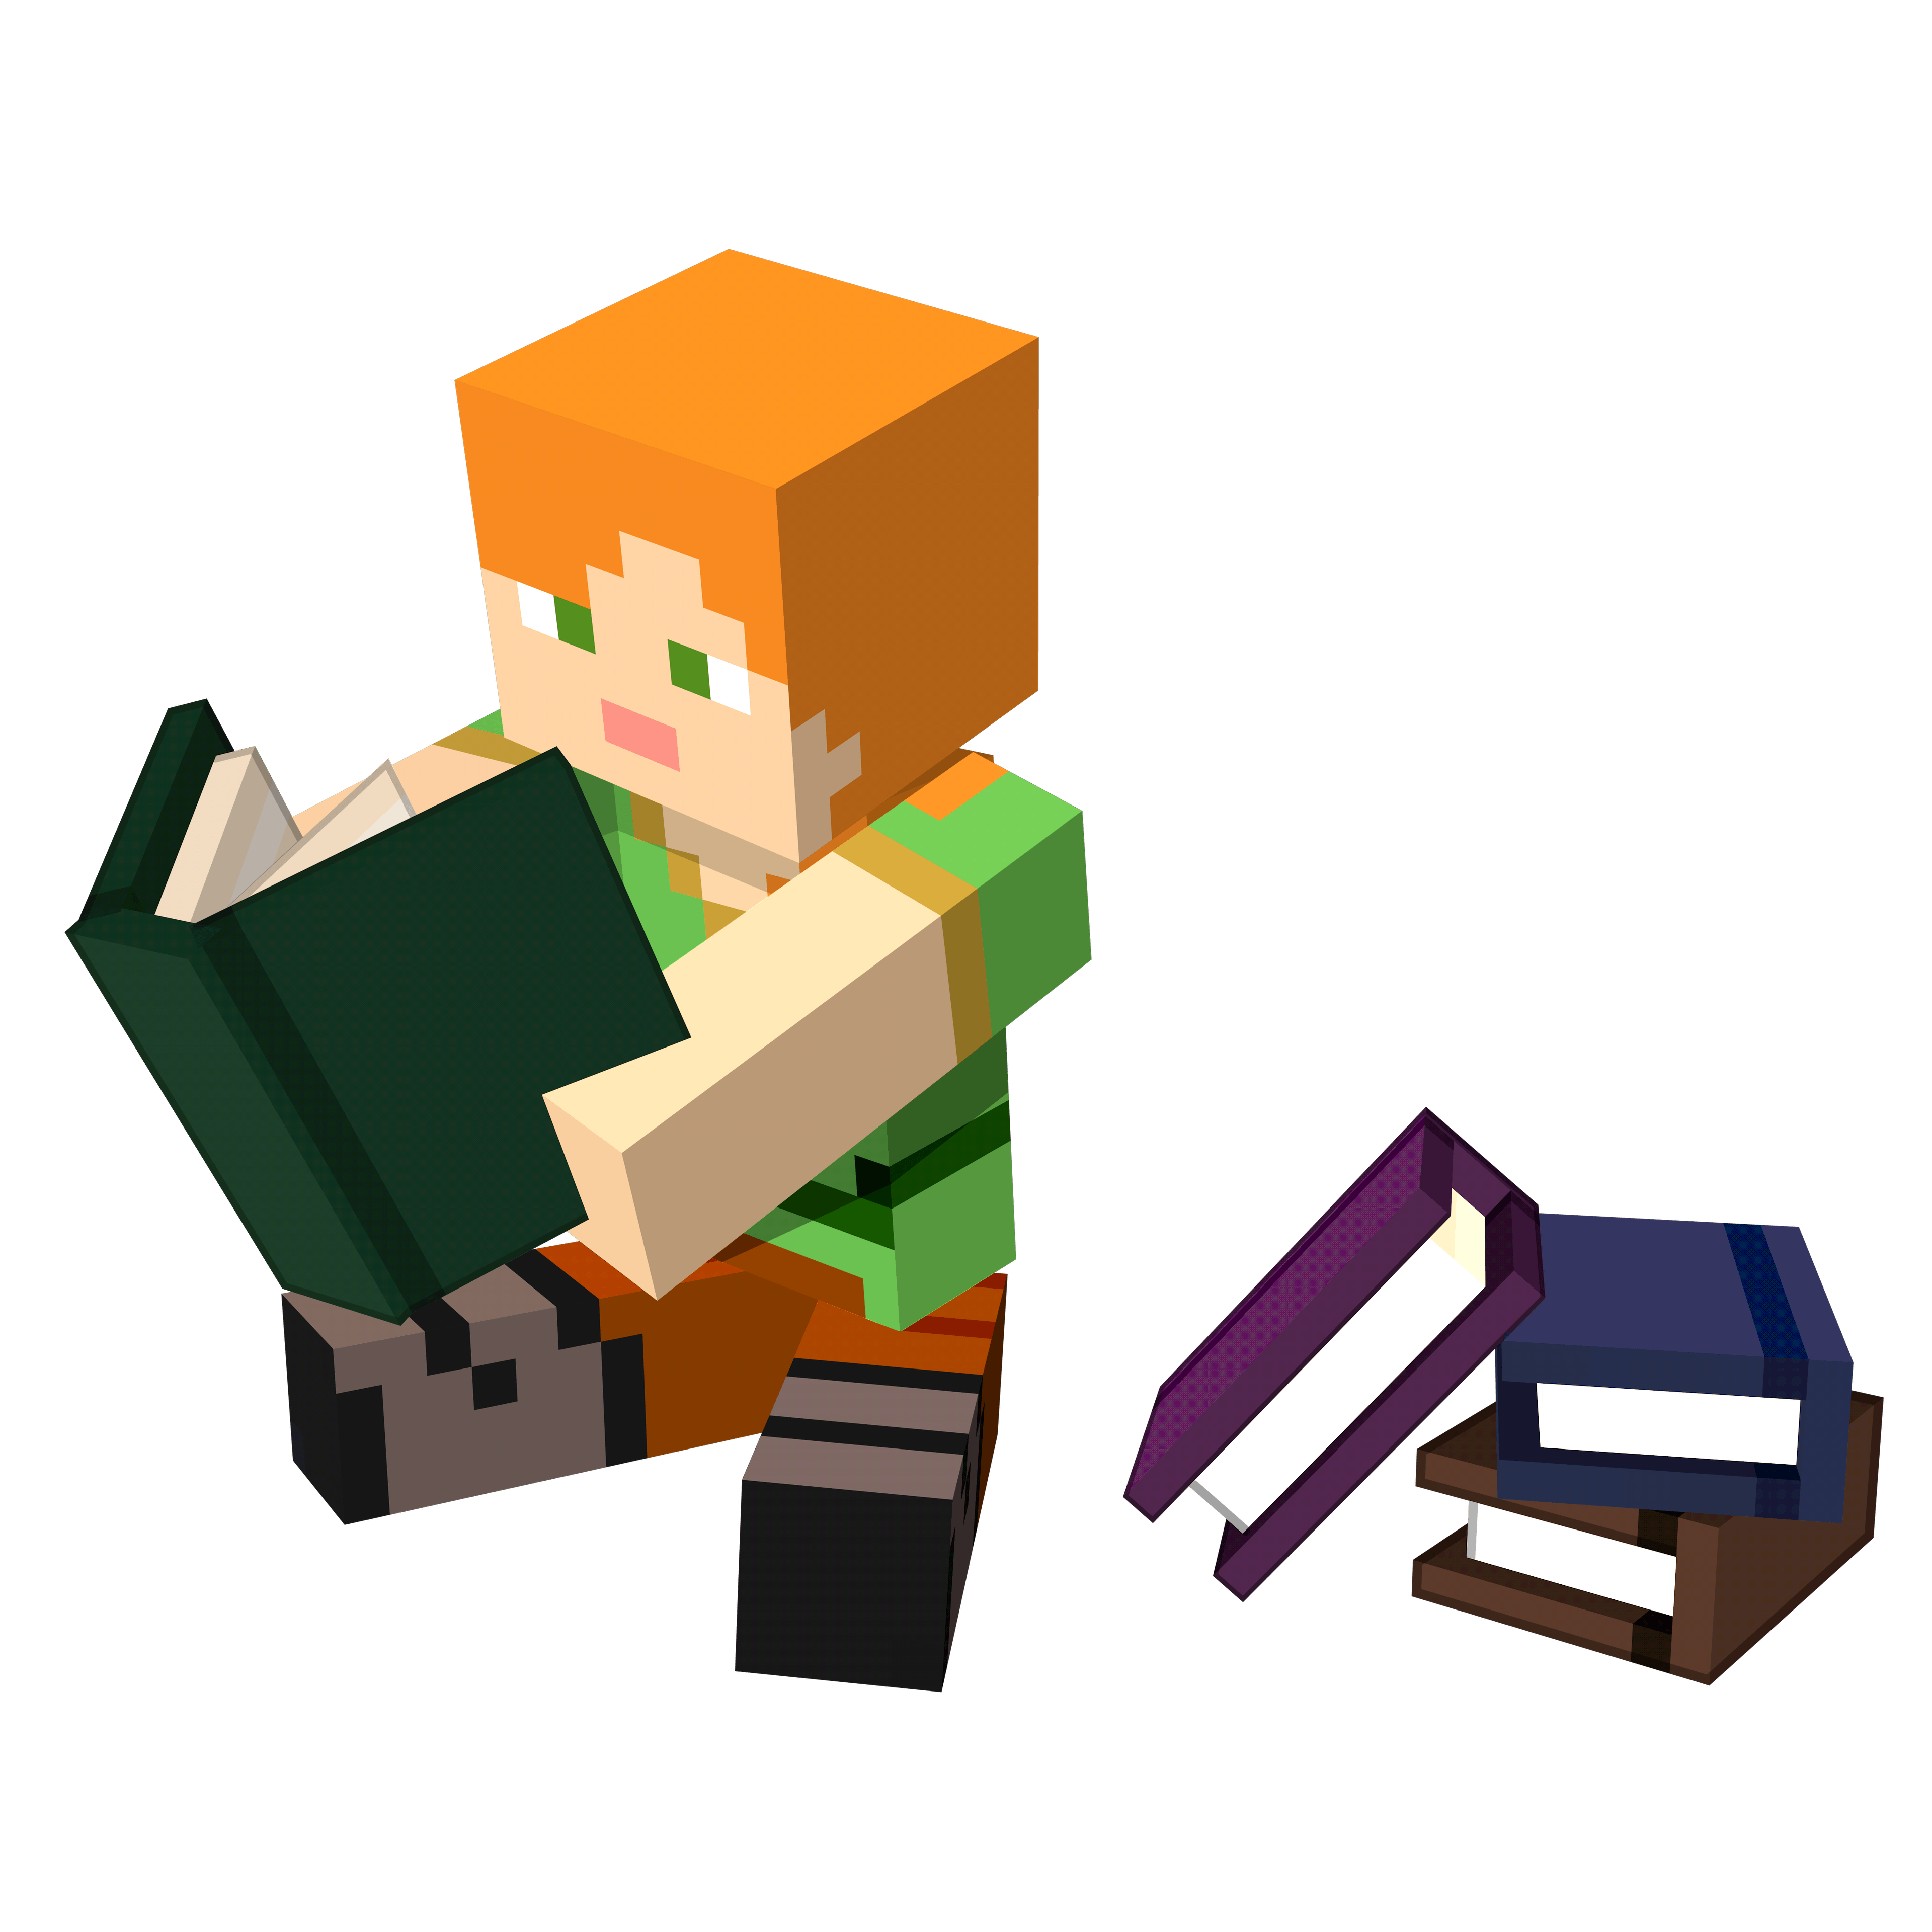 An illustration of a Minecraft character with the default Alex texture sitting and reading a green book, with a pile of 3 other books pile near her